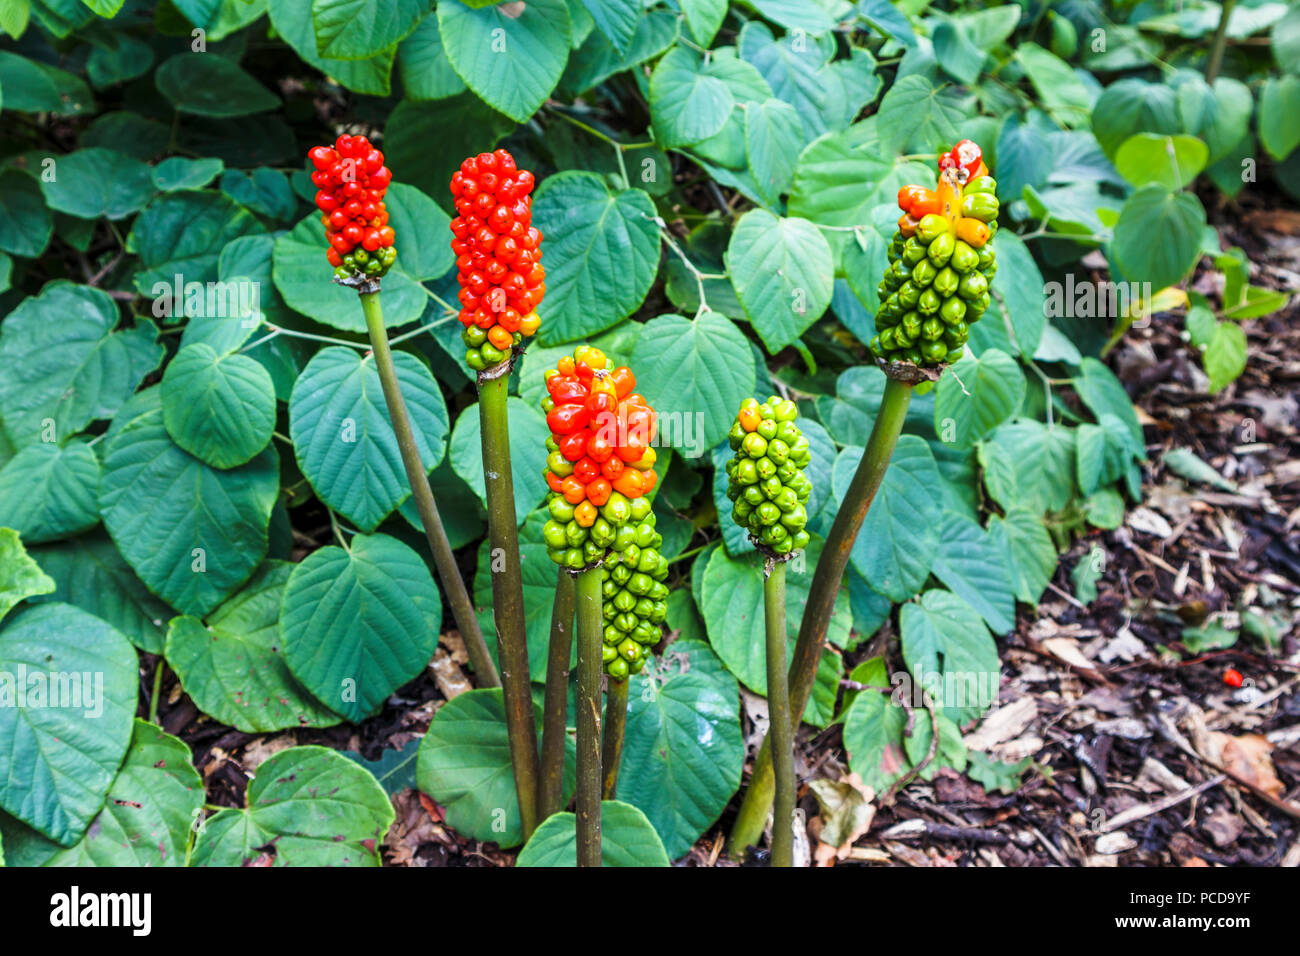 Red and green berries of Arum italicum 'Marmoratum' growing in Royal Horticultural Society (RHS) Gardens, Wisley in summer Stock Photo